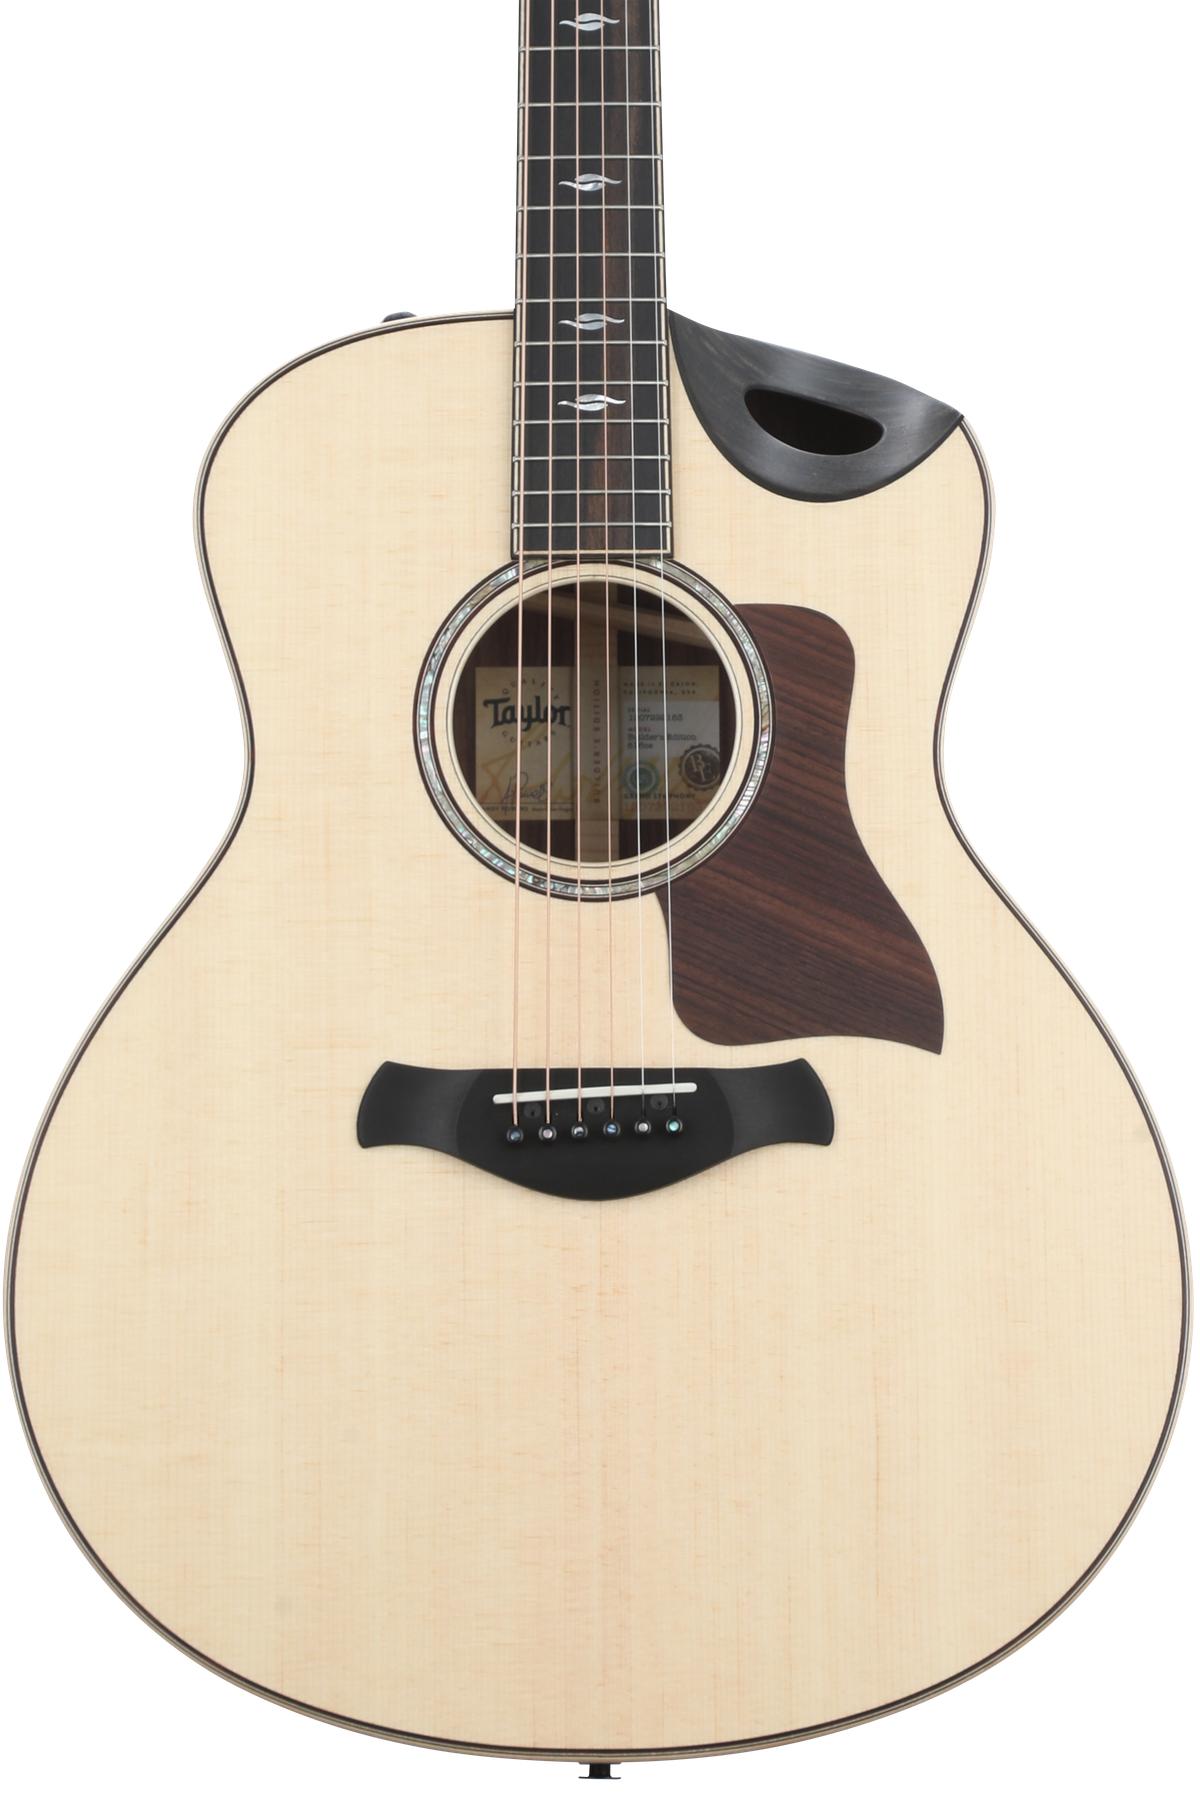 Taylor 816ce Builder's Edition Acoustic-electric Guitar - Natural